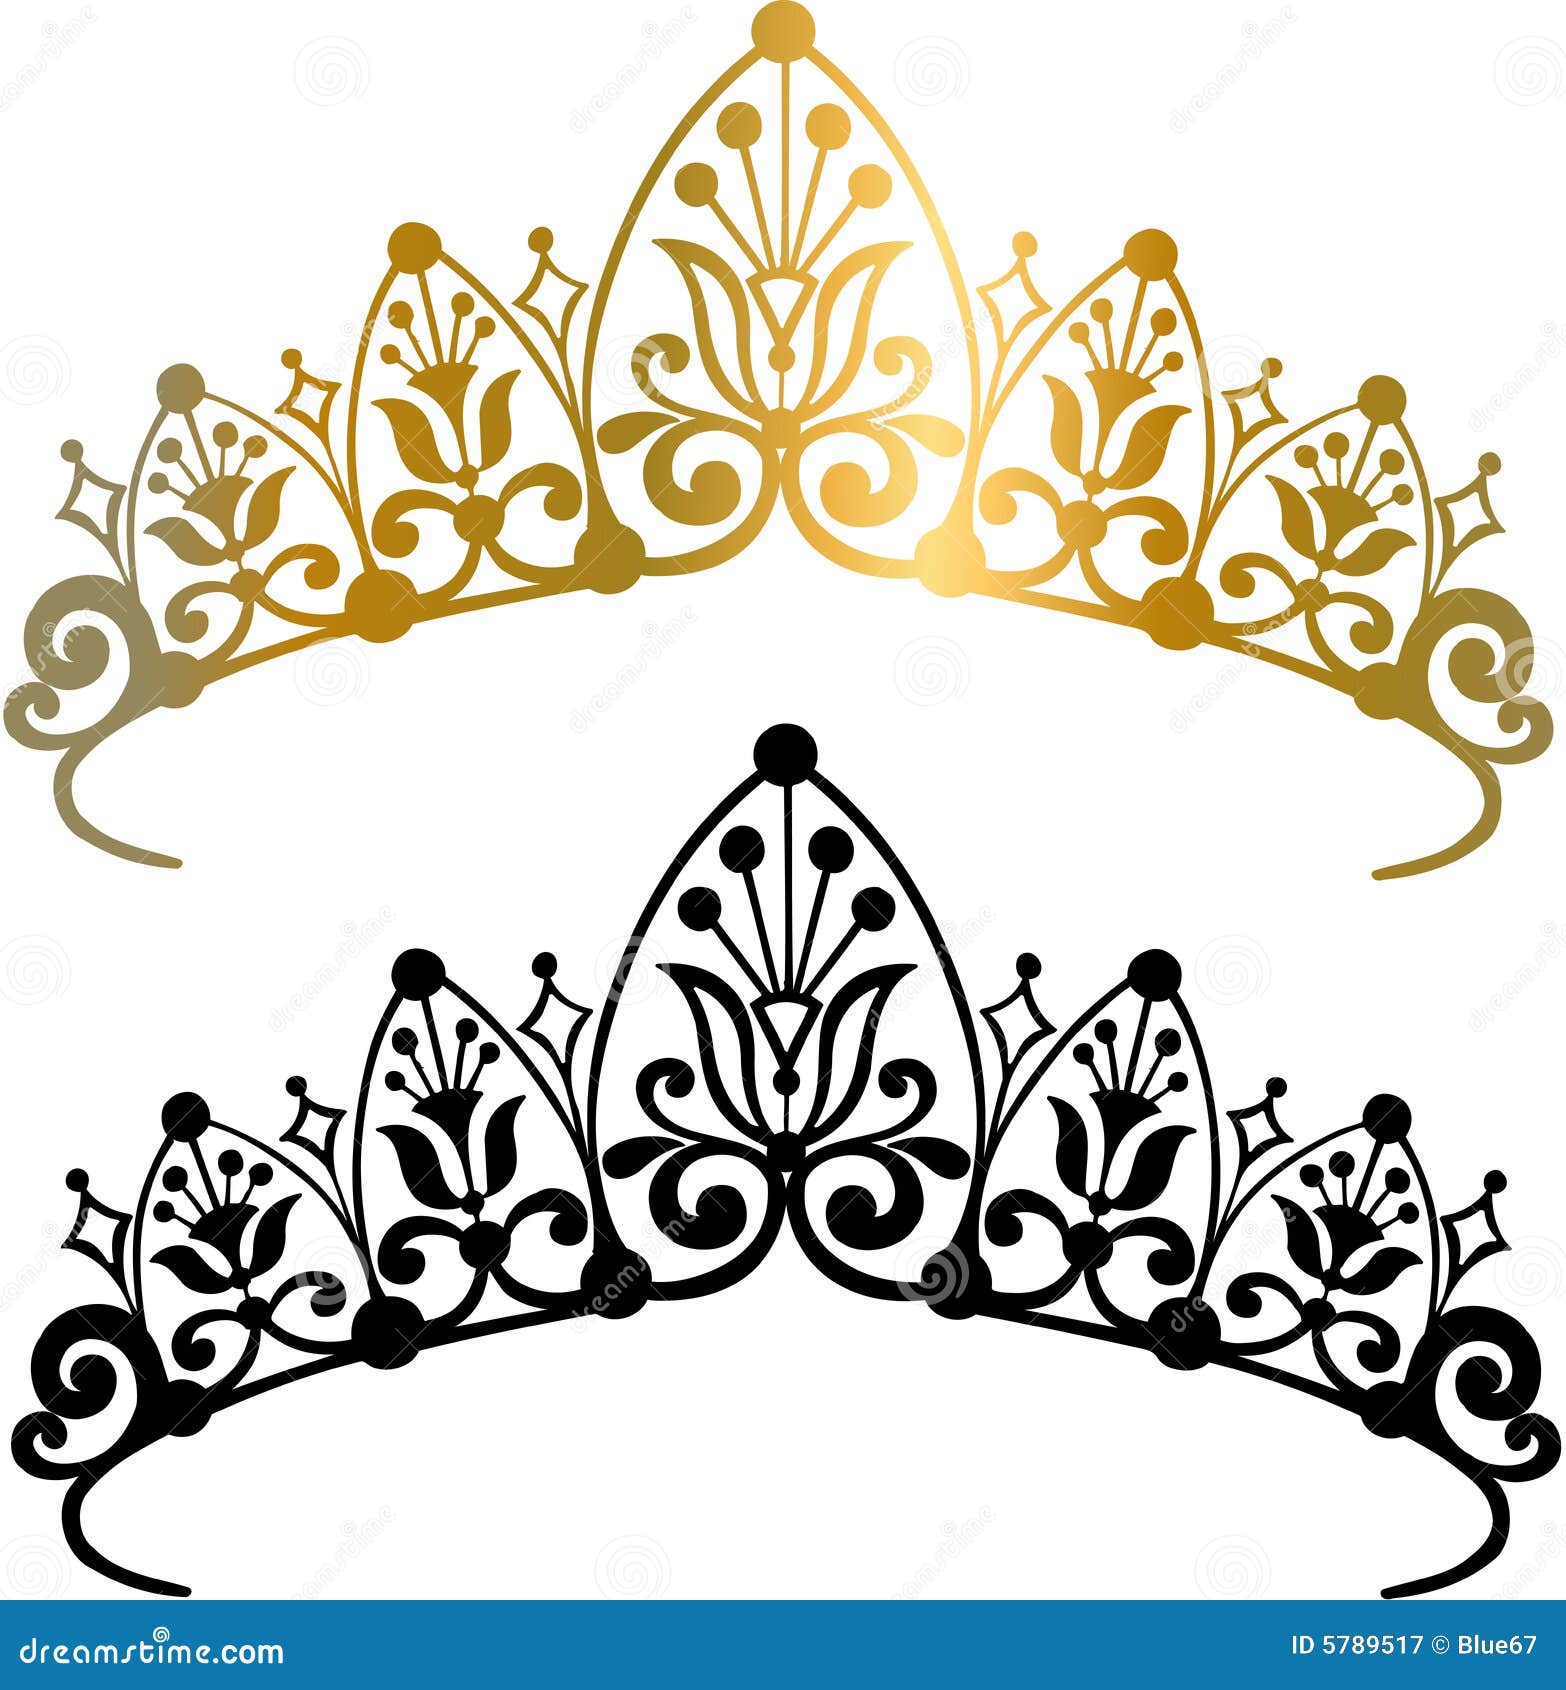 clipart free download crown - photo #35